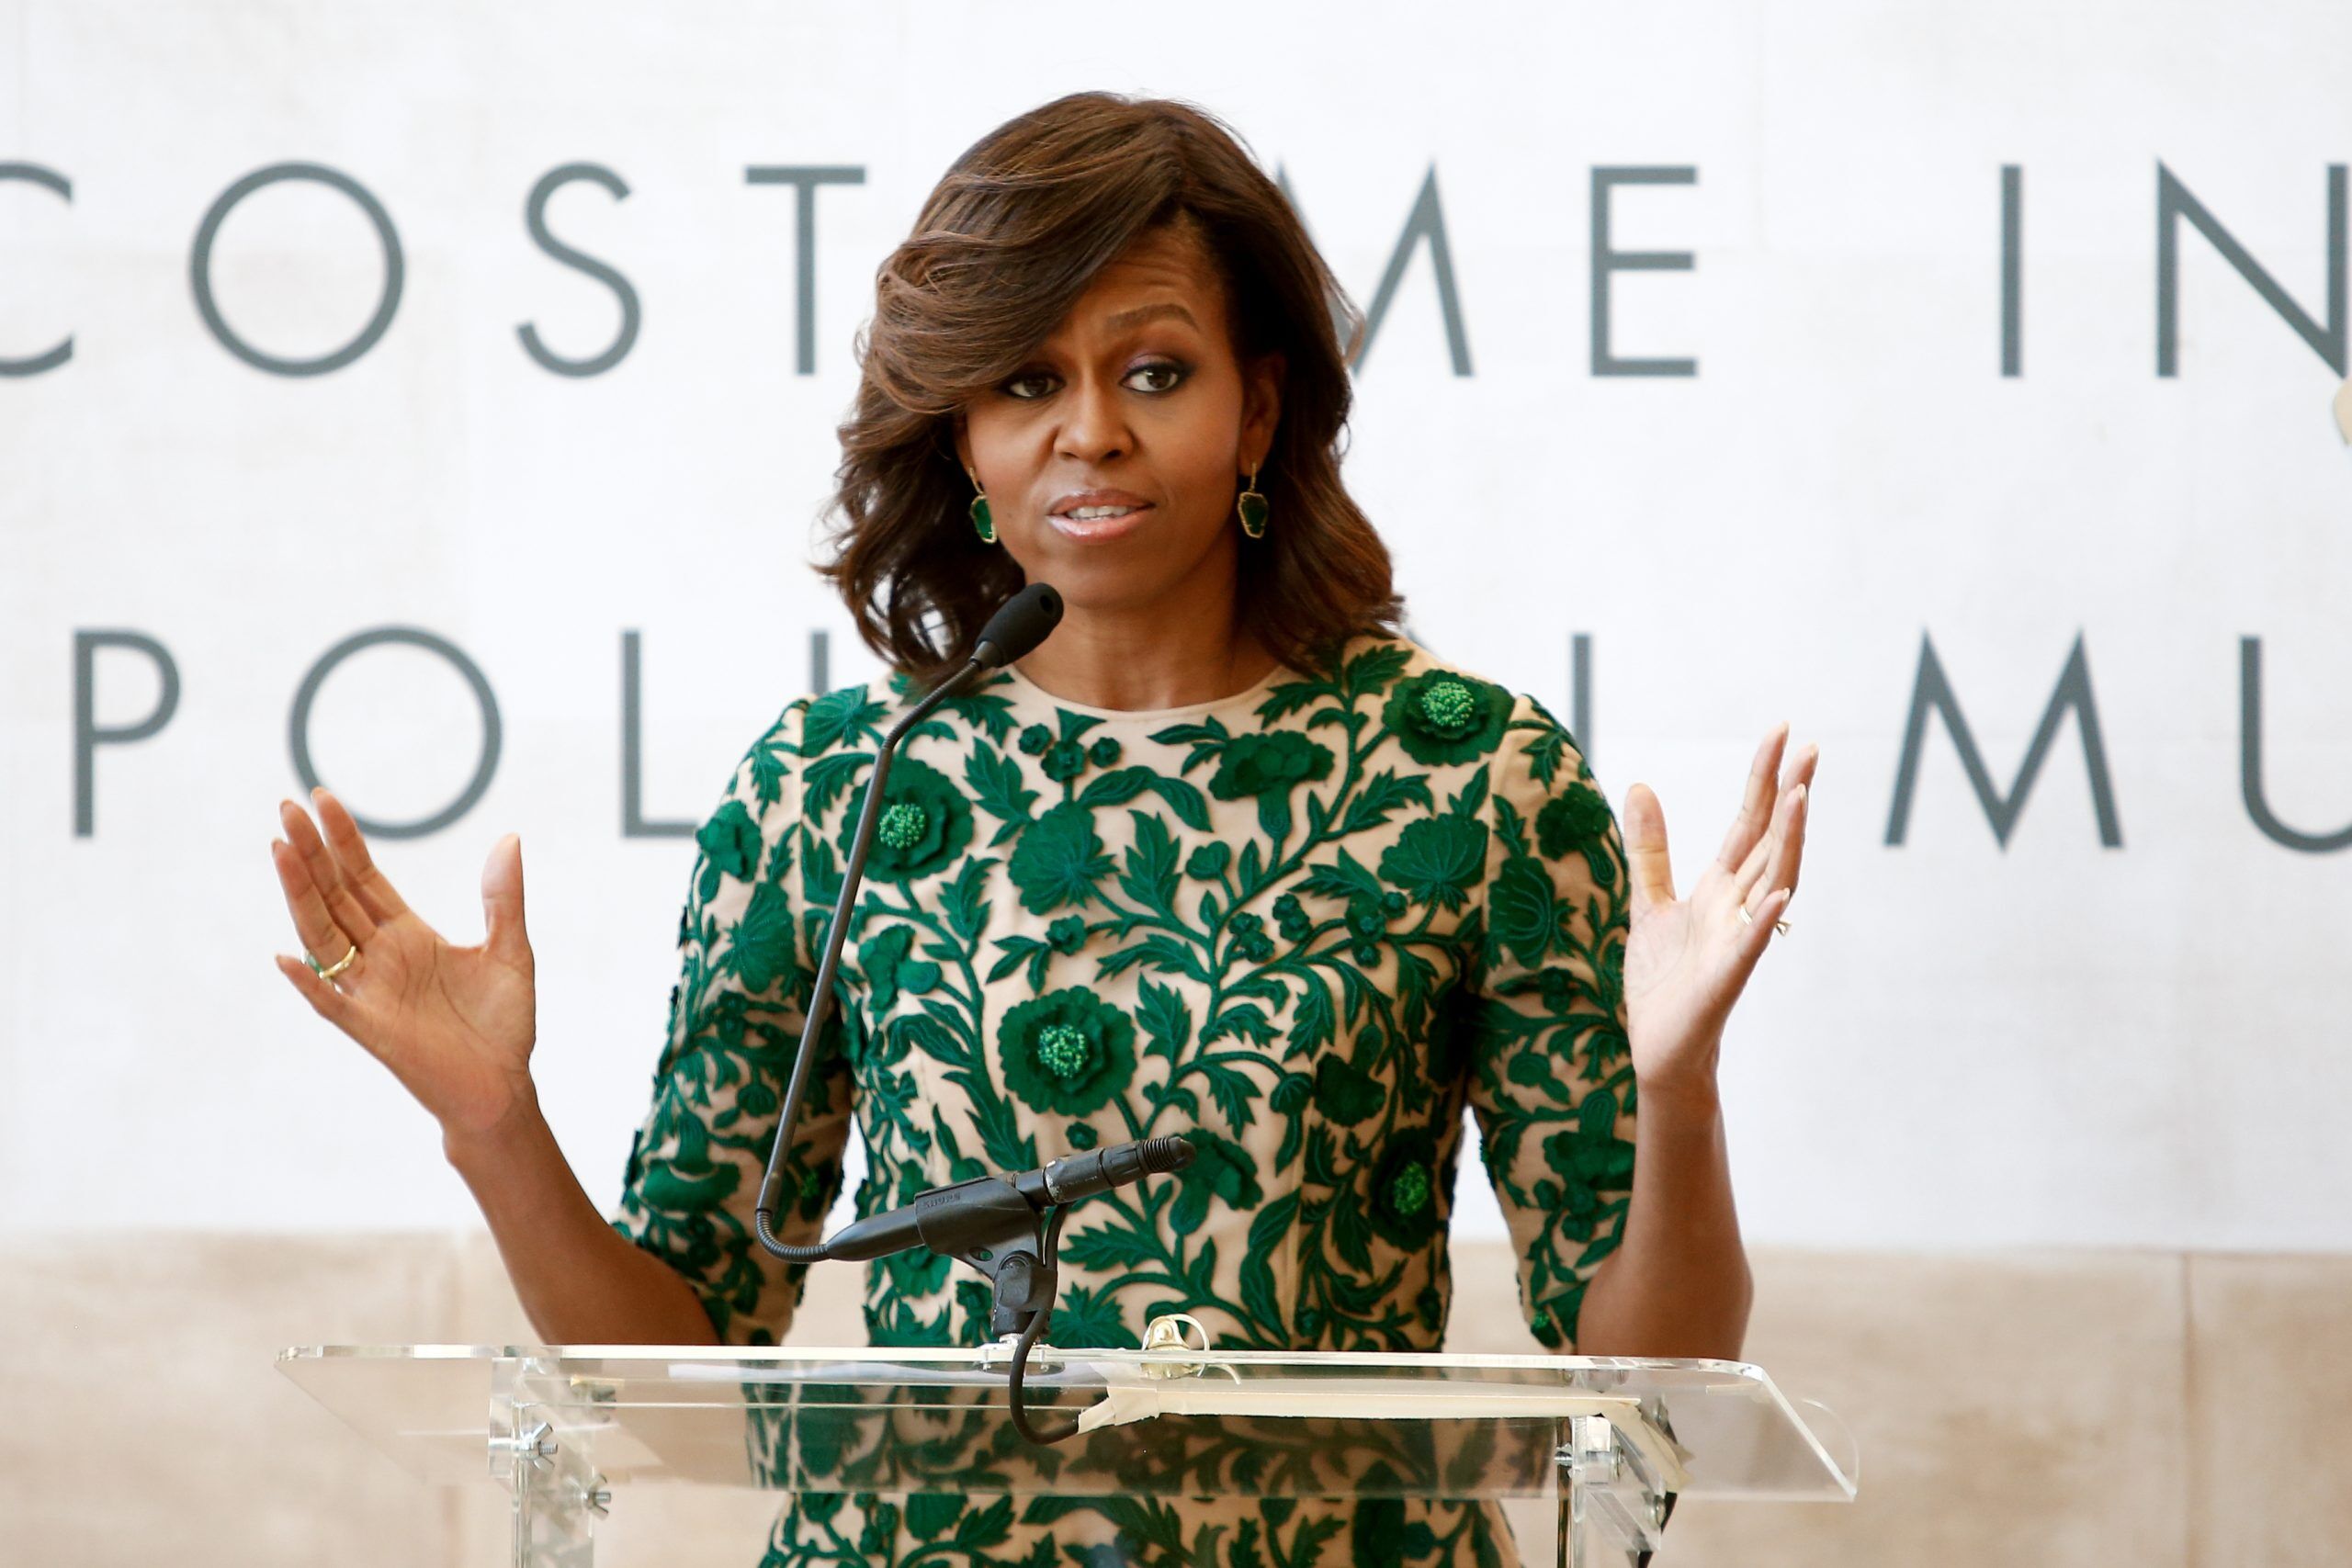 First Lady of the United States Michelle Obama at ribbon cutting ceremony for Anna Wintour Costume Center Grand Opening at Metropolitan Museum of Art on May 5, 2014 in New York City.